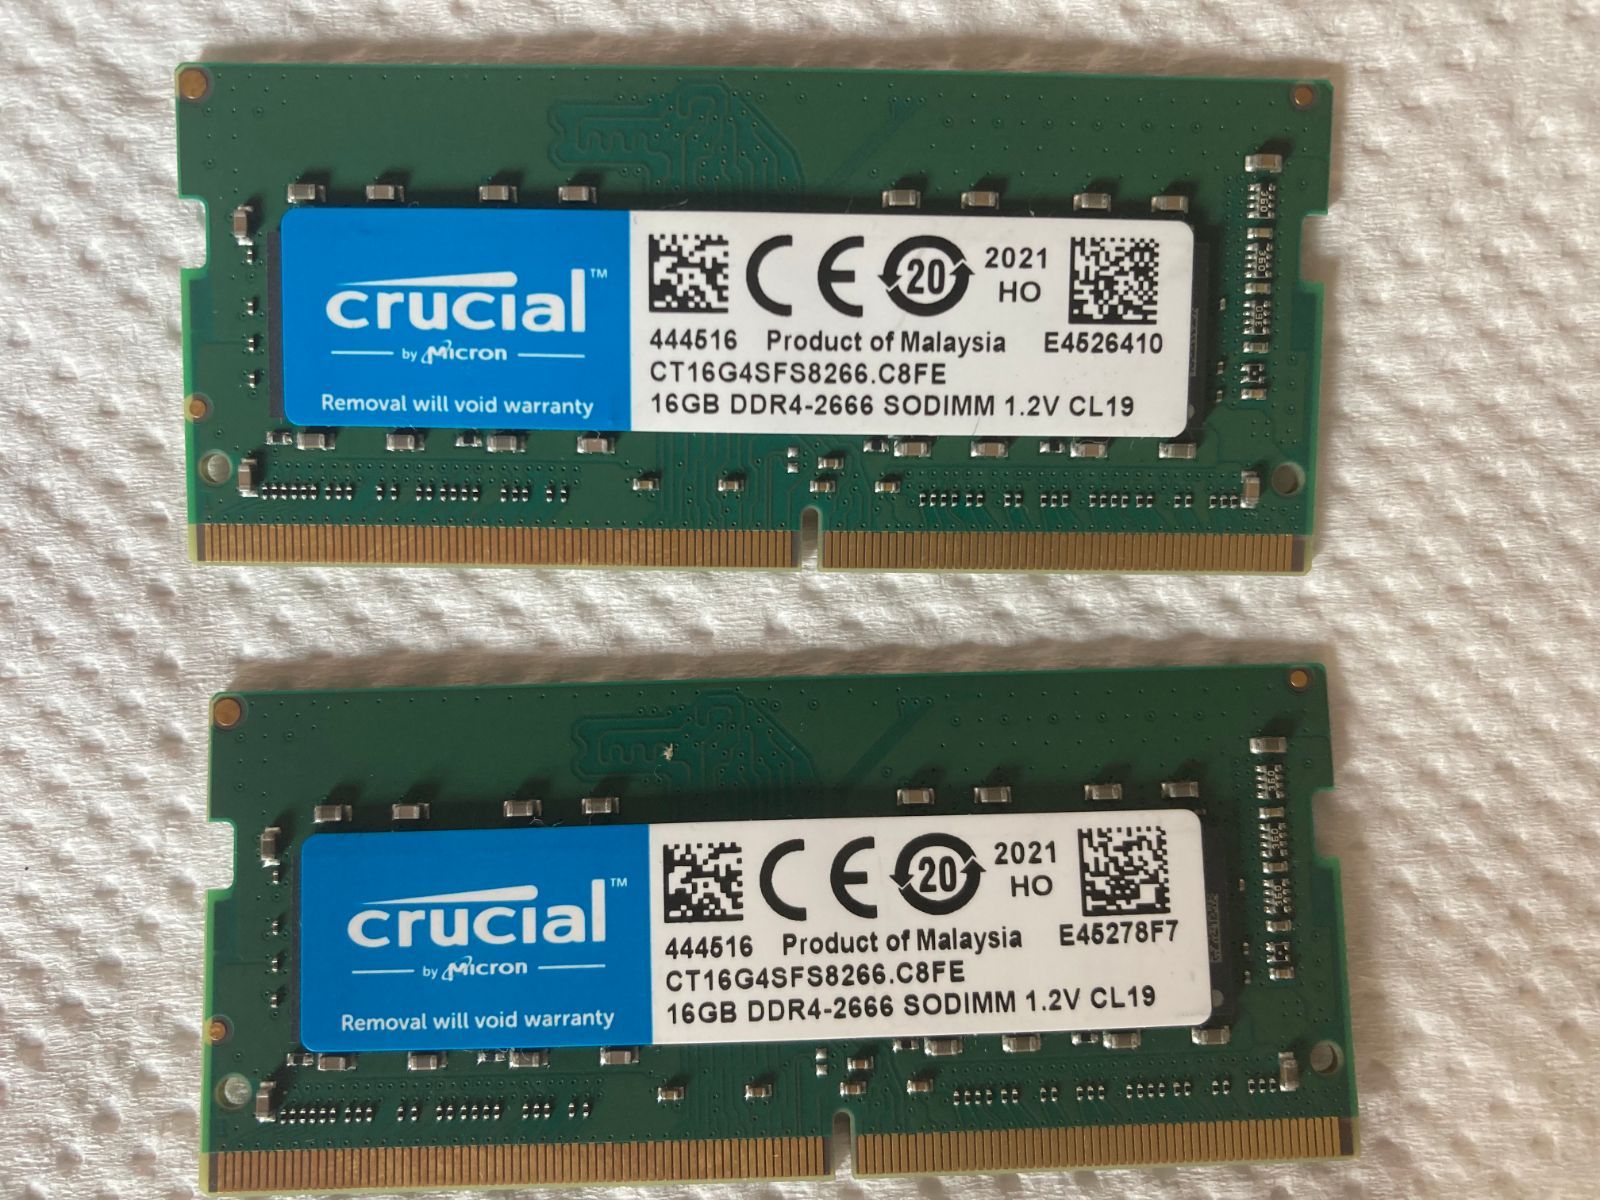 Crucial PC4-21300 (DDR4-2666）SODIMM 16GBPC/タブレット